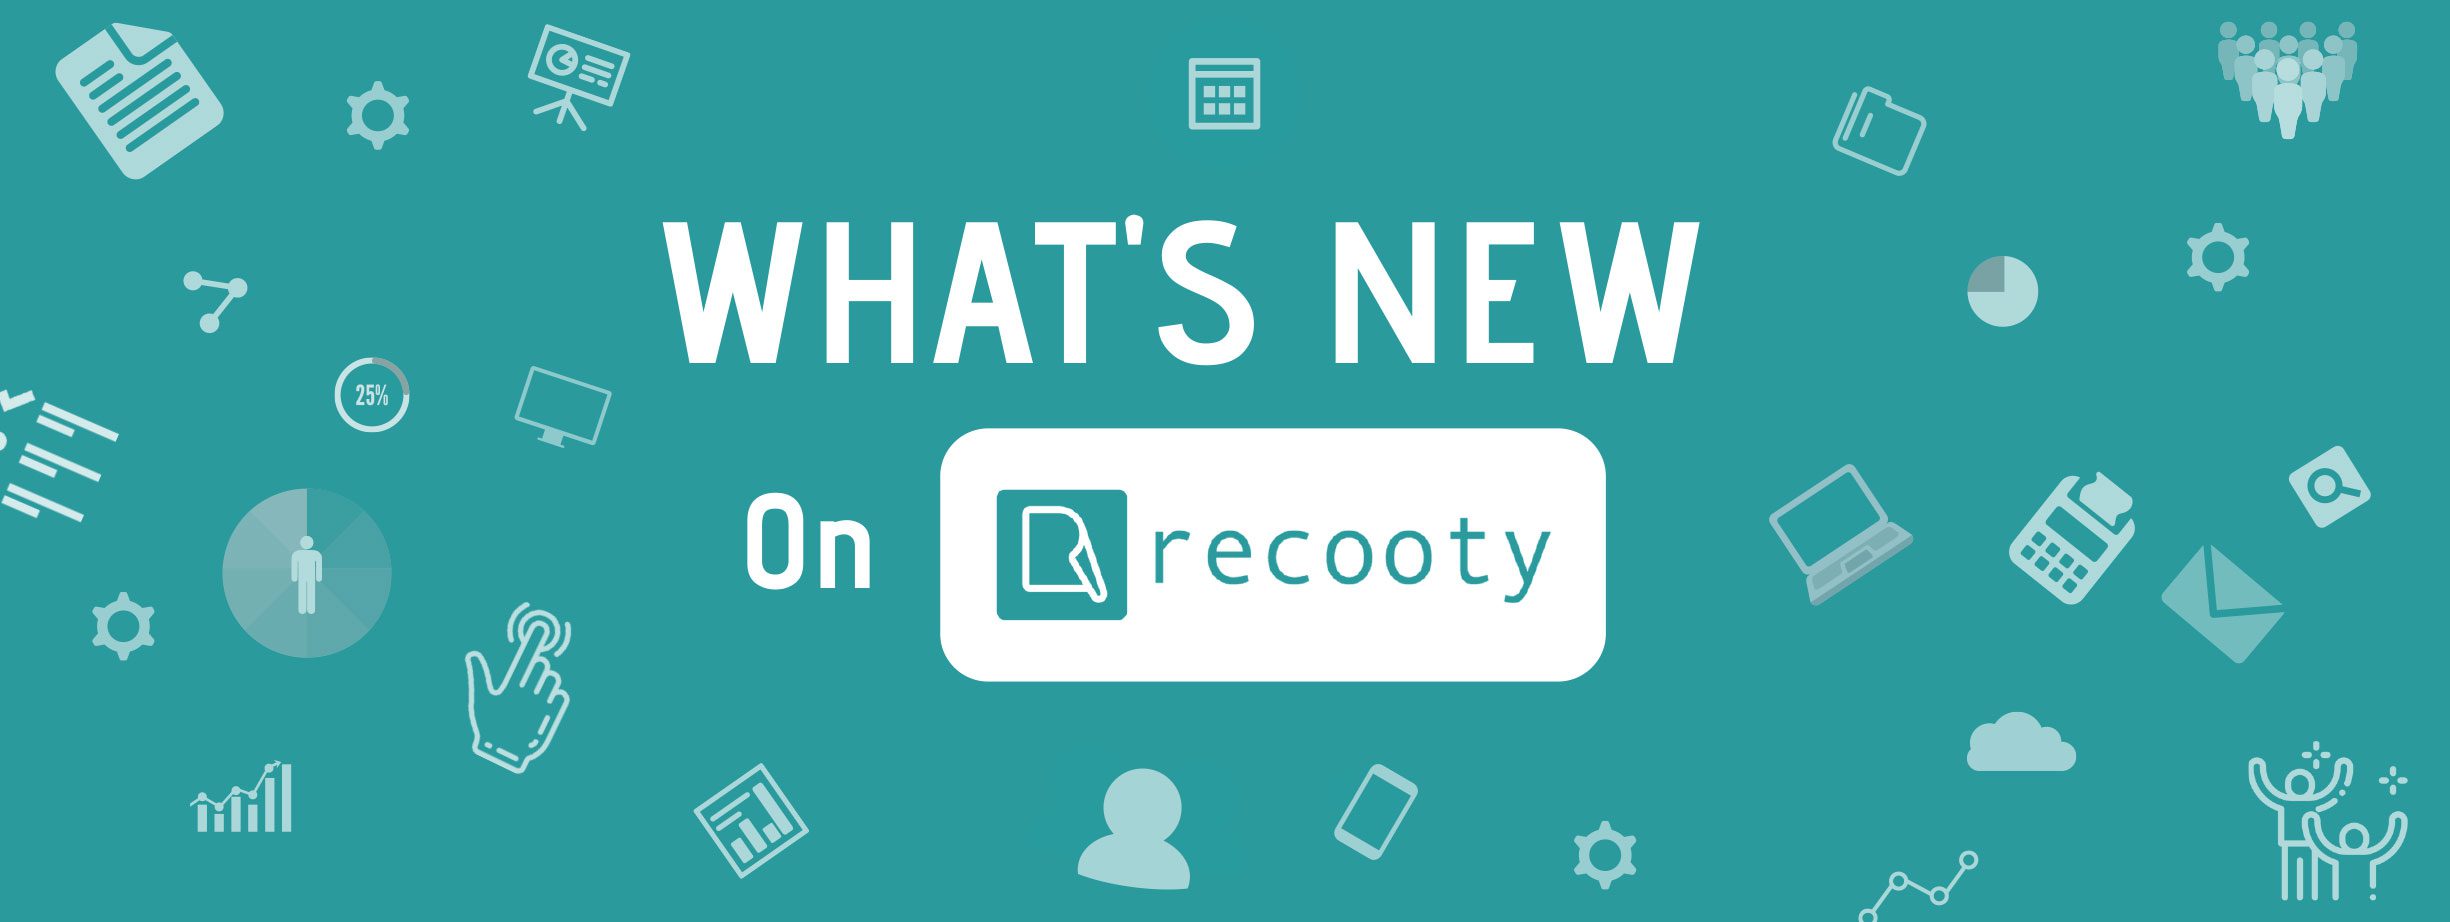 New Recooty features